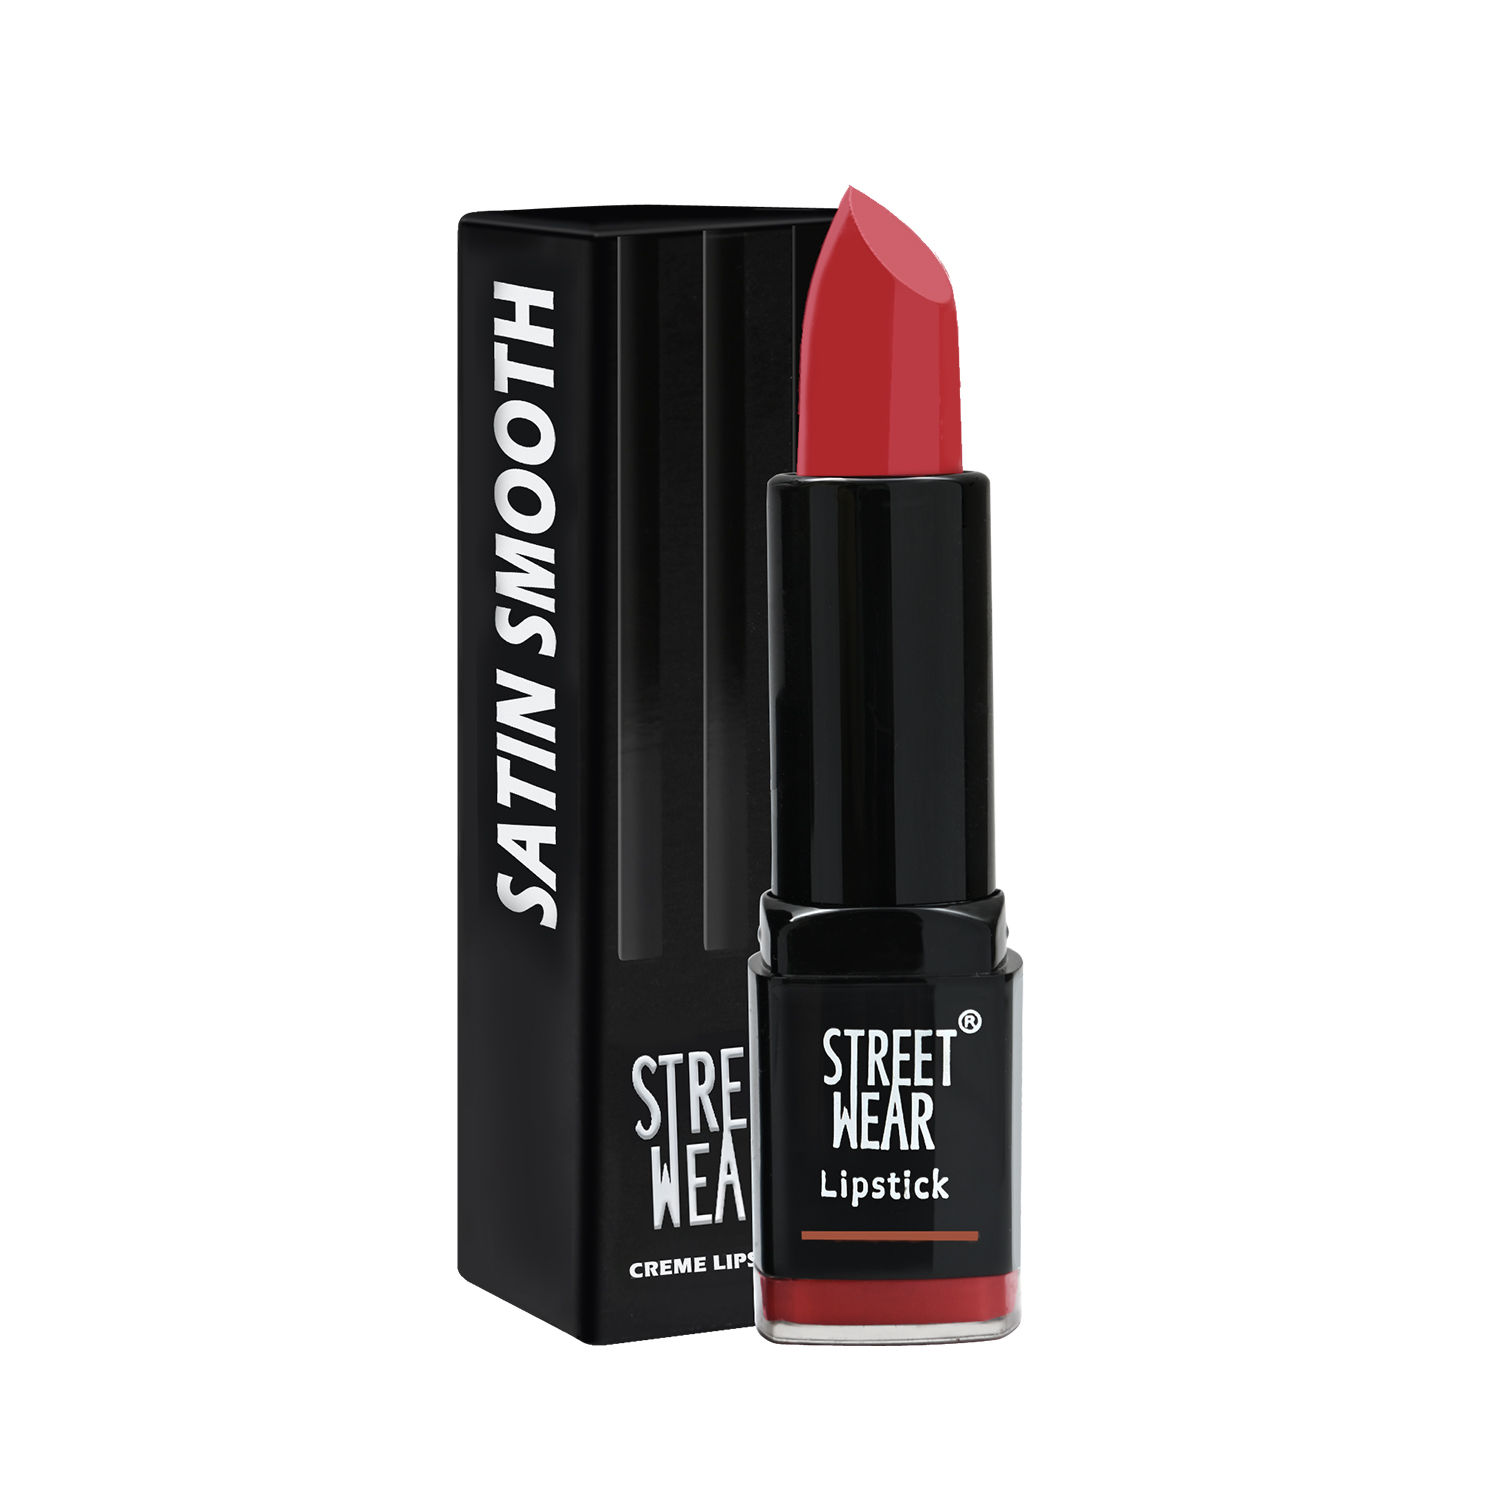 Buy STREET WEAR® Satin Smooth Lipstick -CAPTIVATING ROSE (Pink) - 4.2 gms - Longwear Creme Lipstick, Moisturizing, Creamy Formuation, 100% Color payoff, Enriched with Aloe vera, Vitamin E and Shea Butter - Purplle